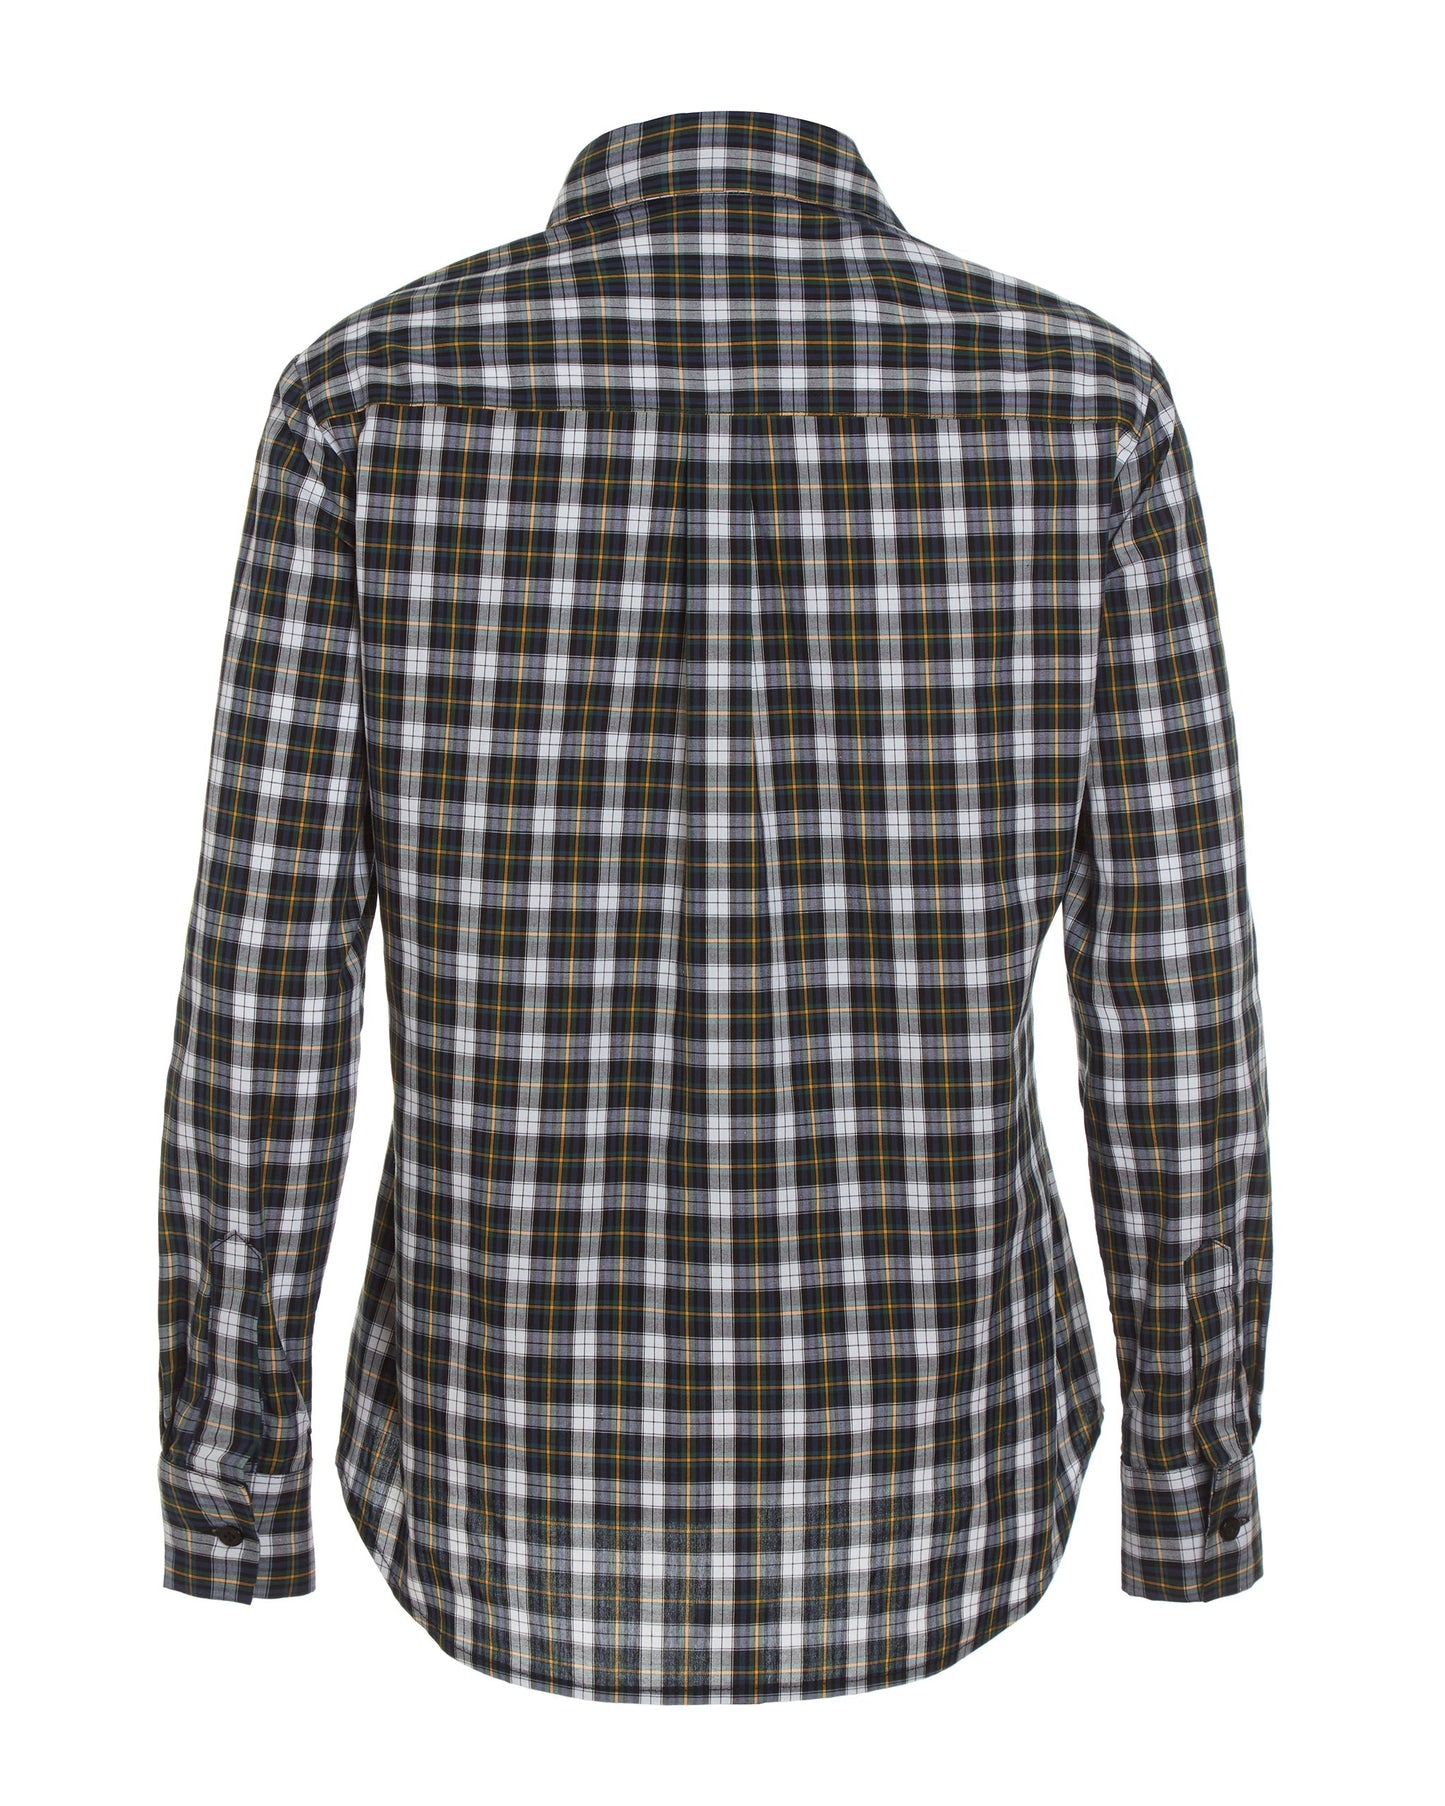 Back flat lay of plaid cotton long sleeve classic button down 